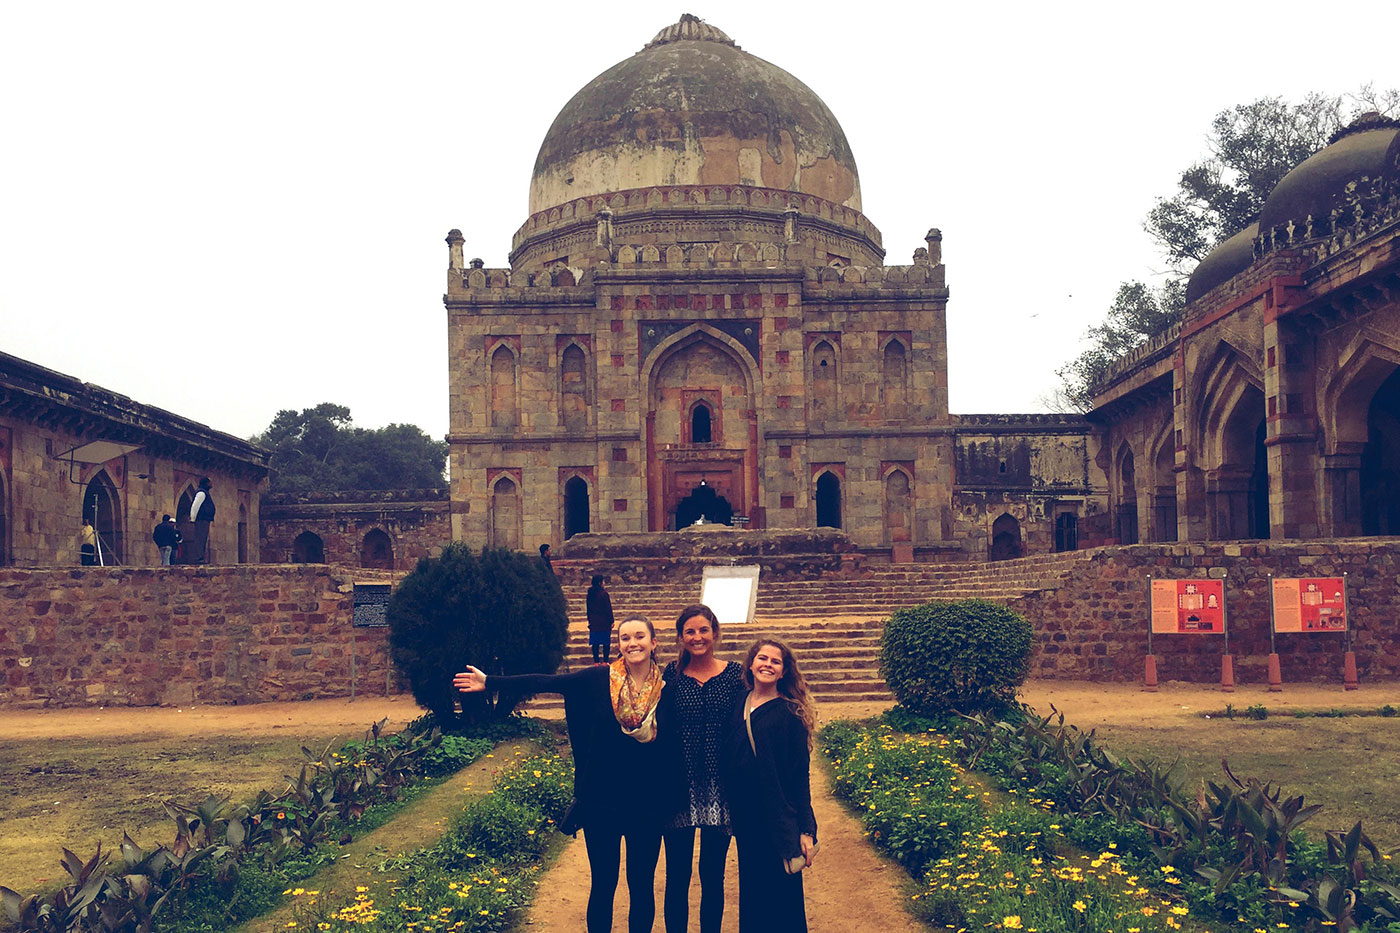 A trio of students stand together for a photo during their visit to the Old Fort in New Delhi.